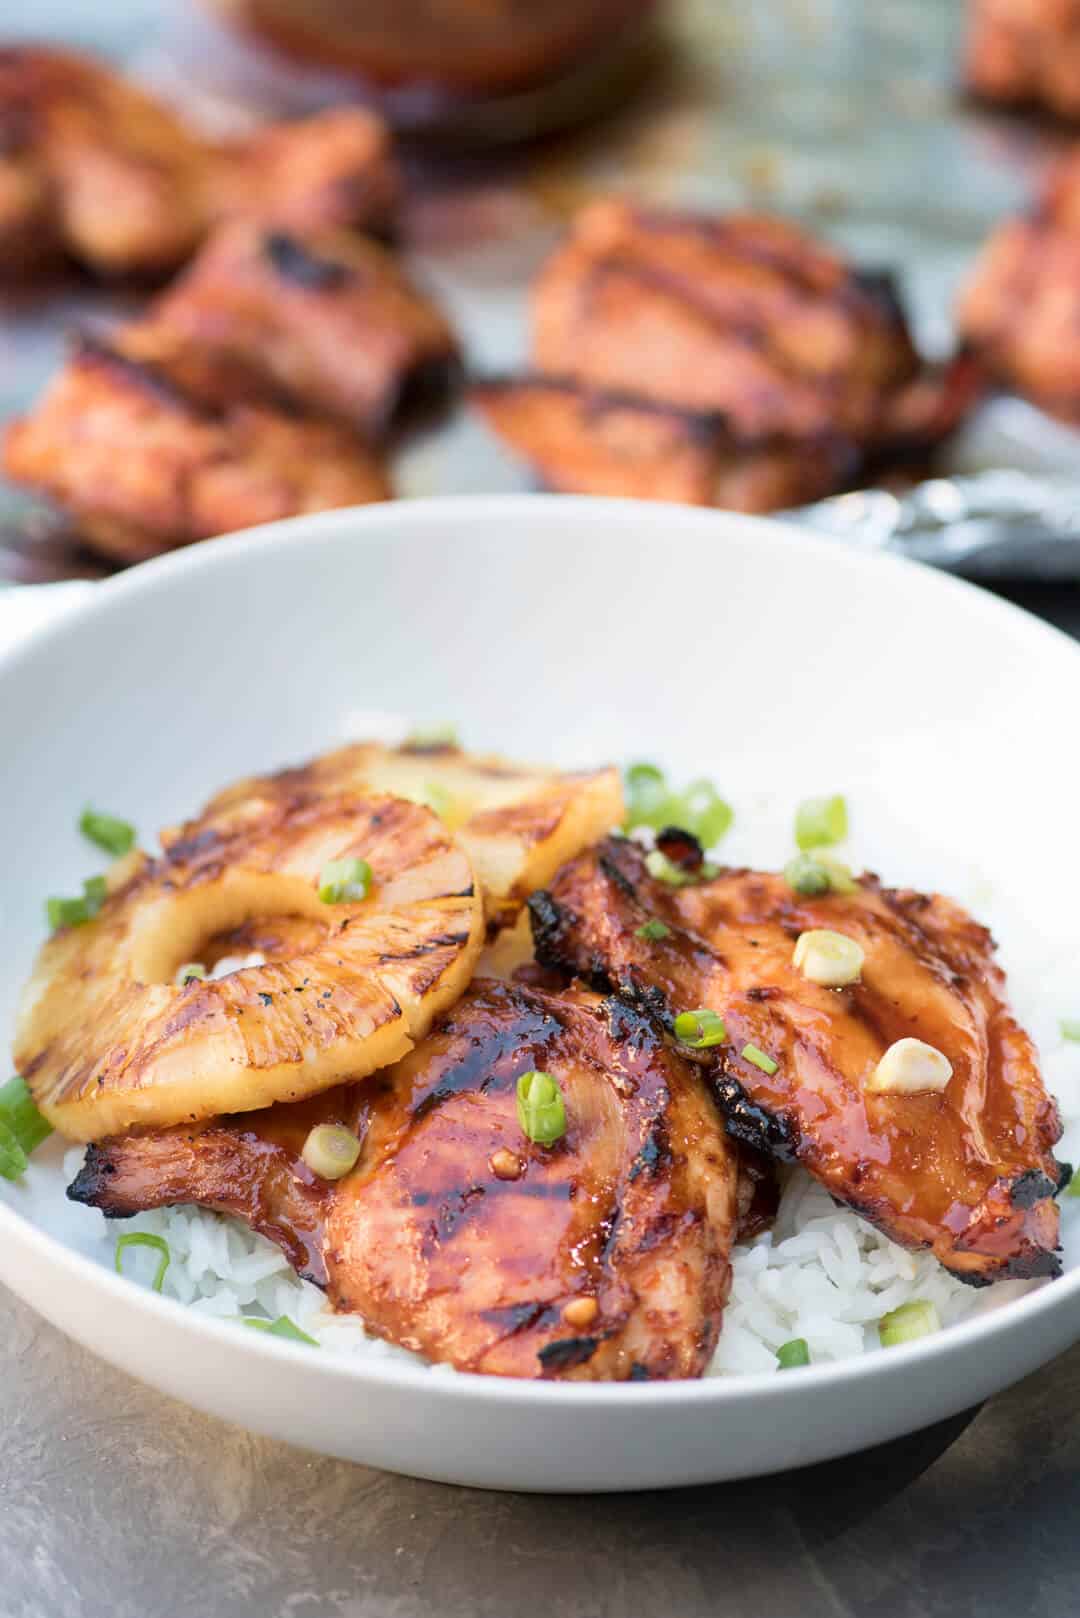 A close up of the grilled hawaiian chicken in a white bowl.